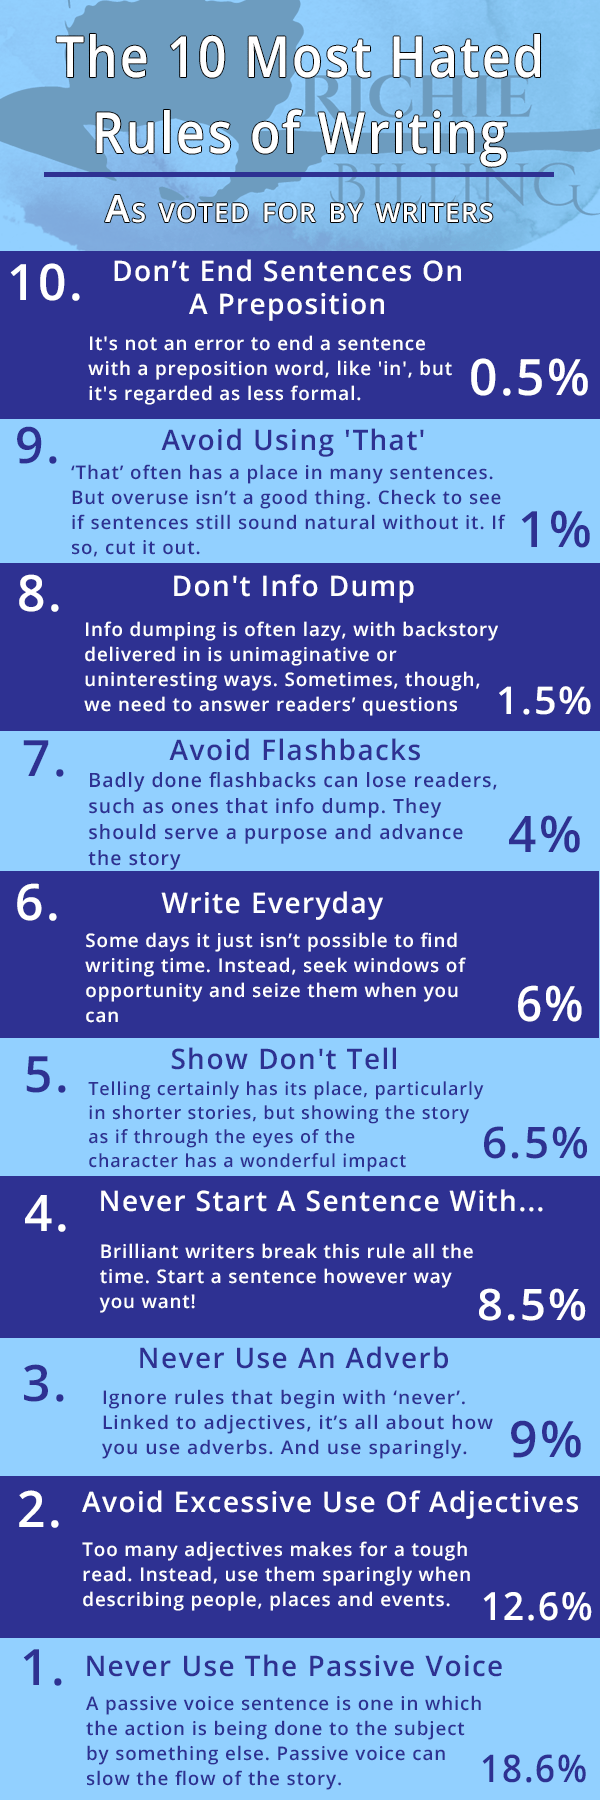 rules of writing infographic